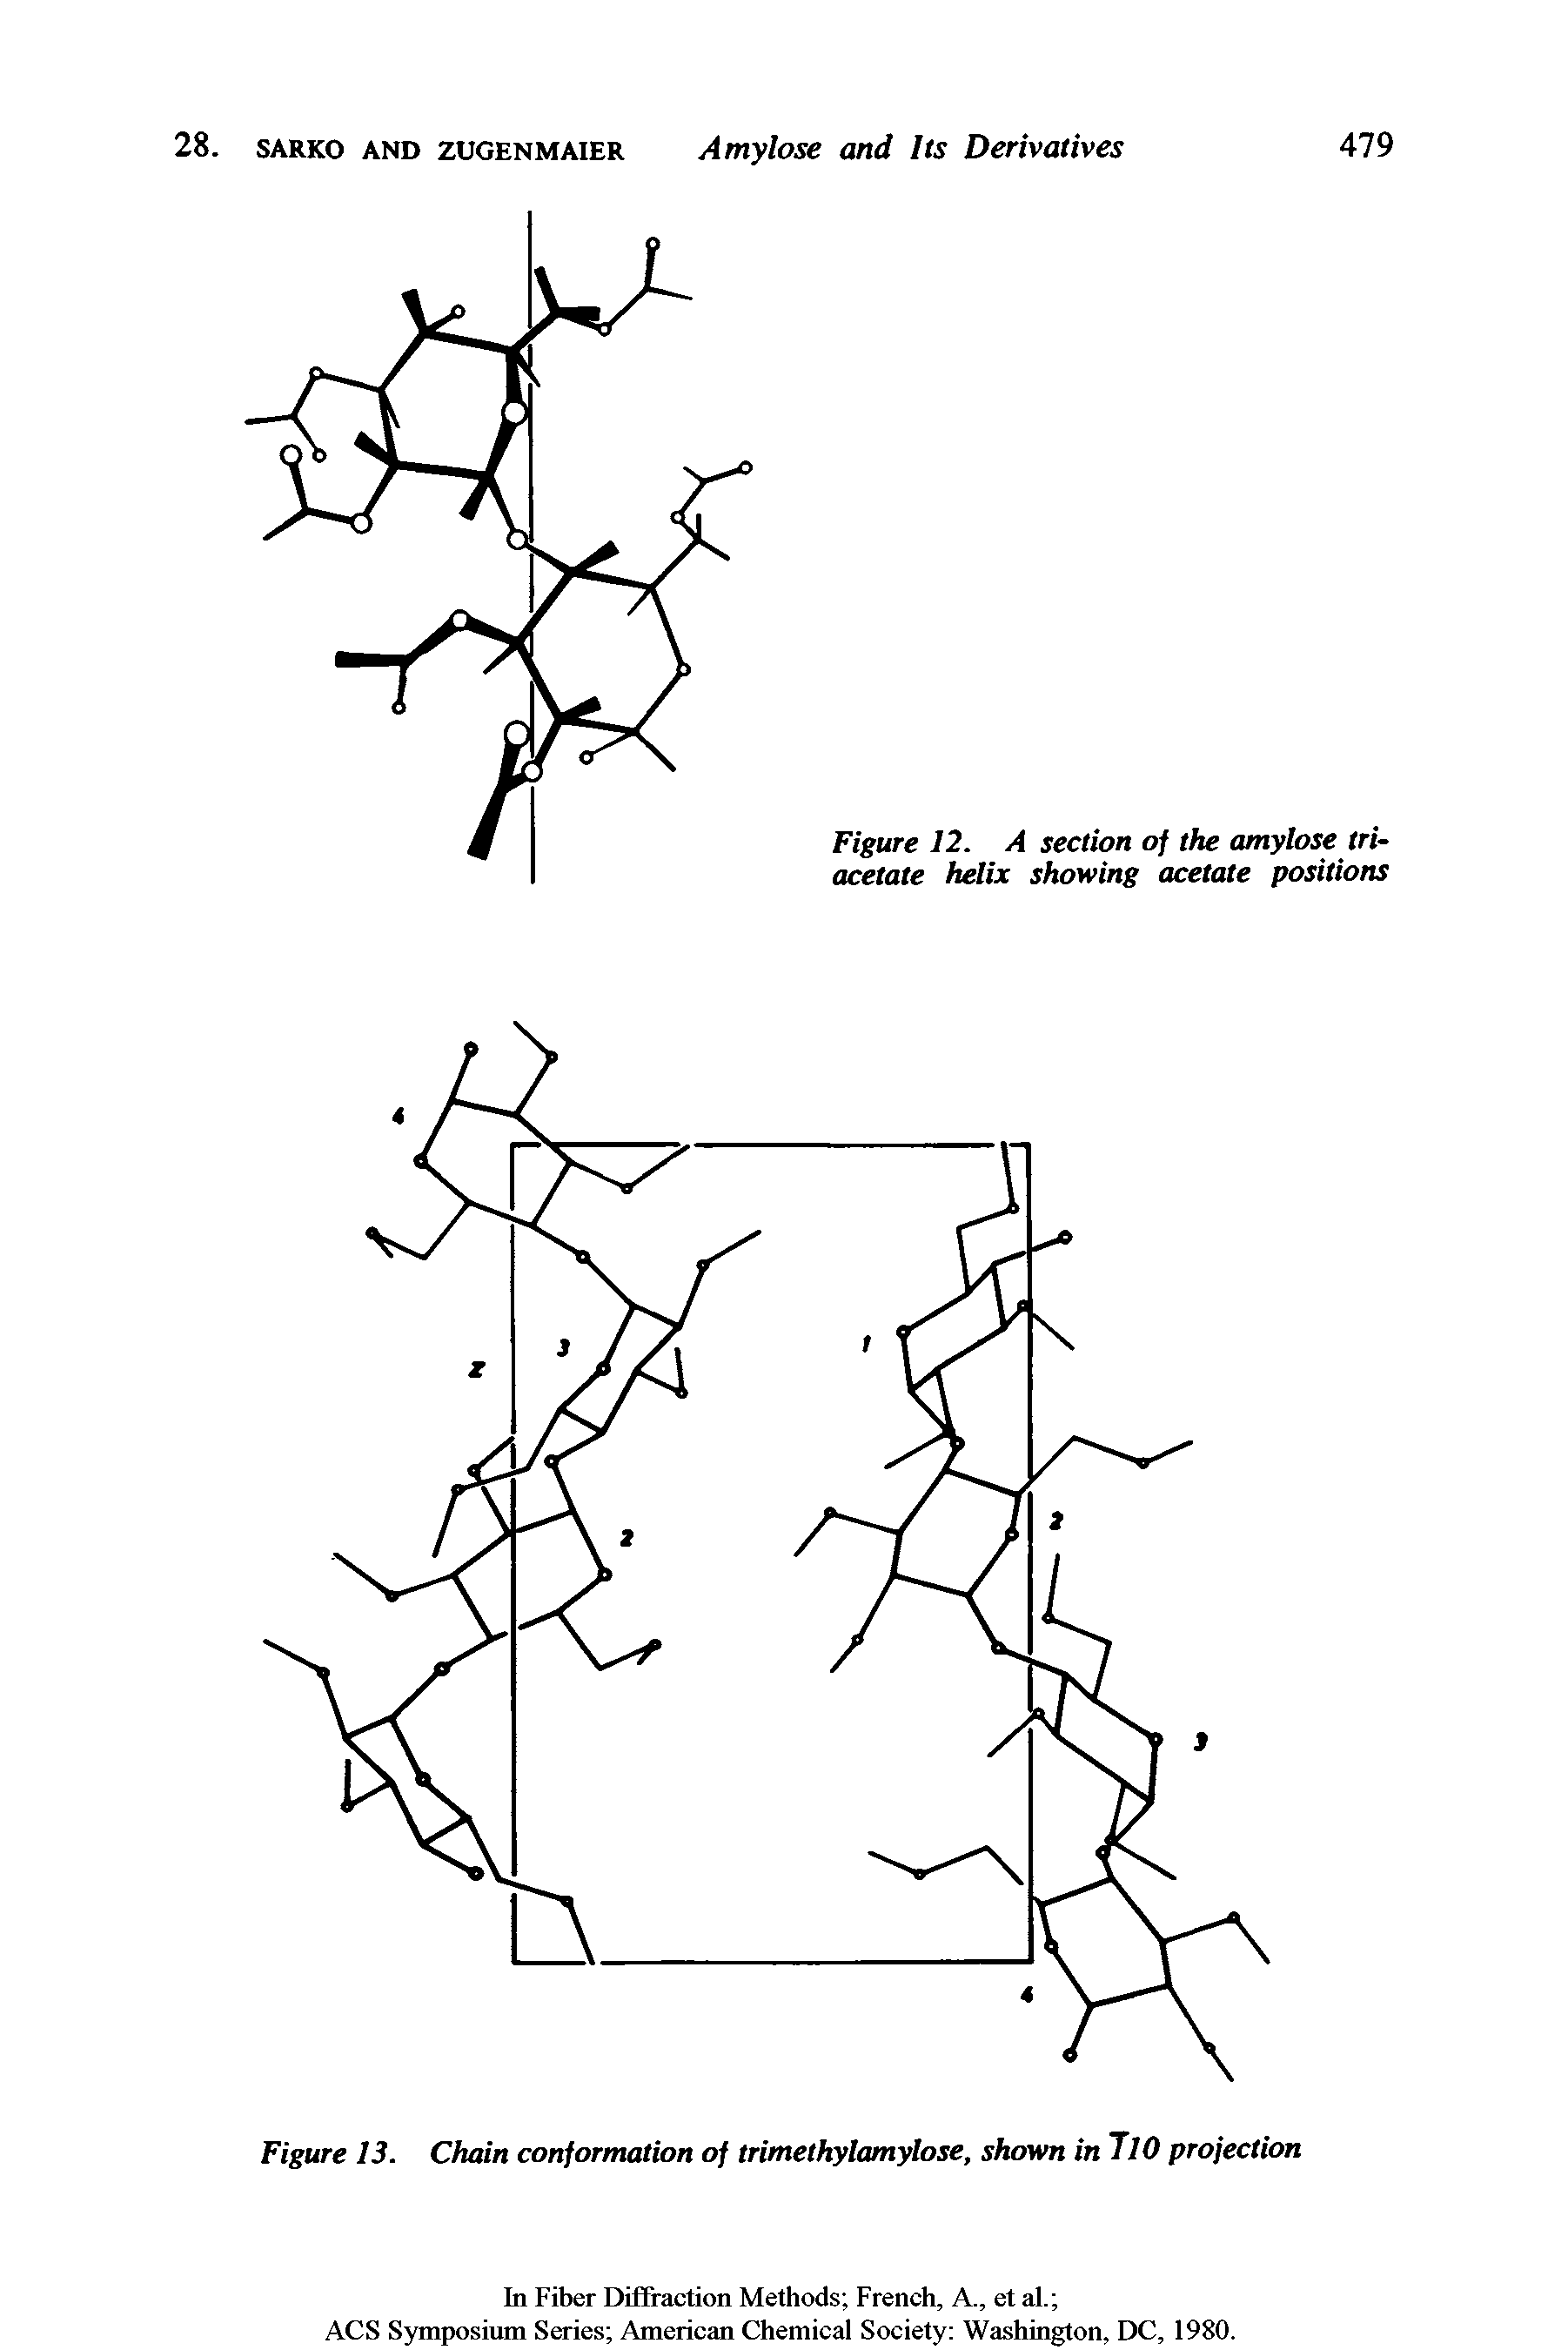 Figure 12. A section of the amylose triacetate helix showing acetate positions...